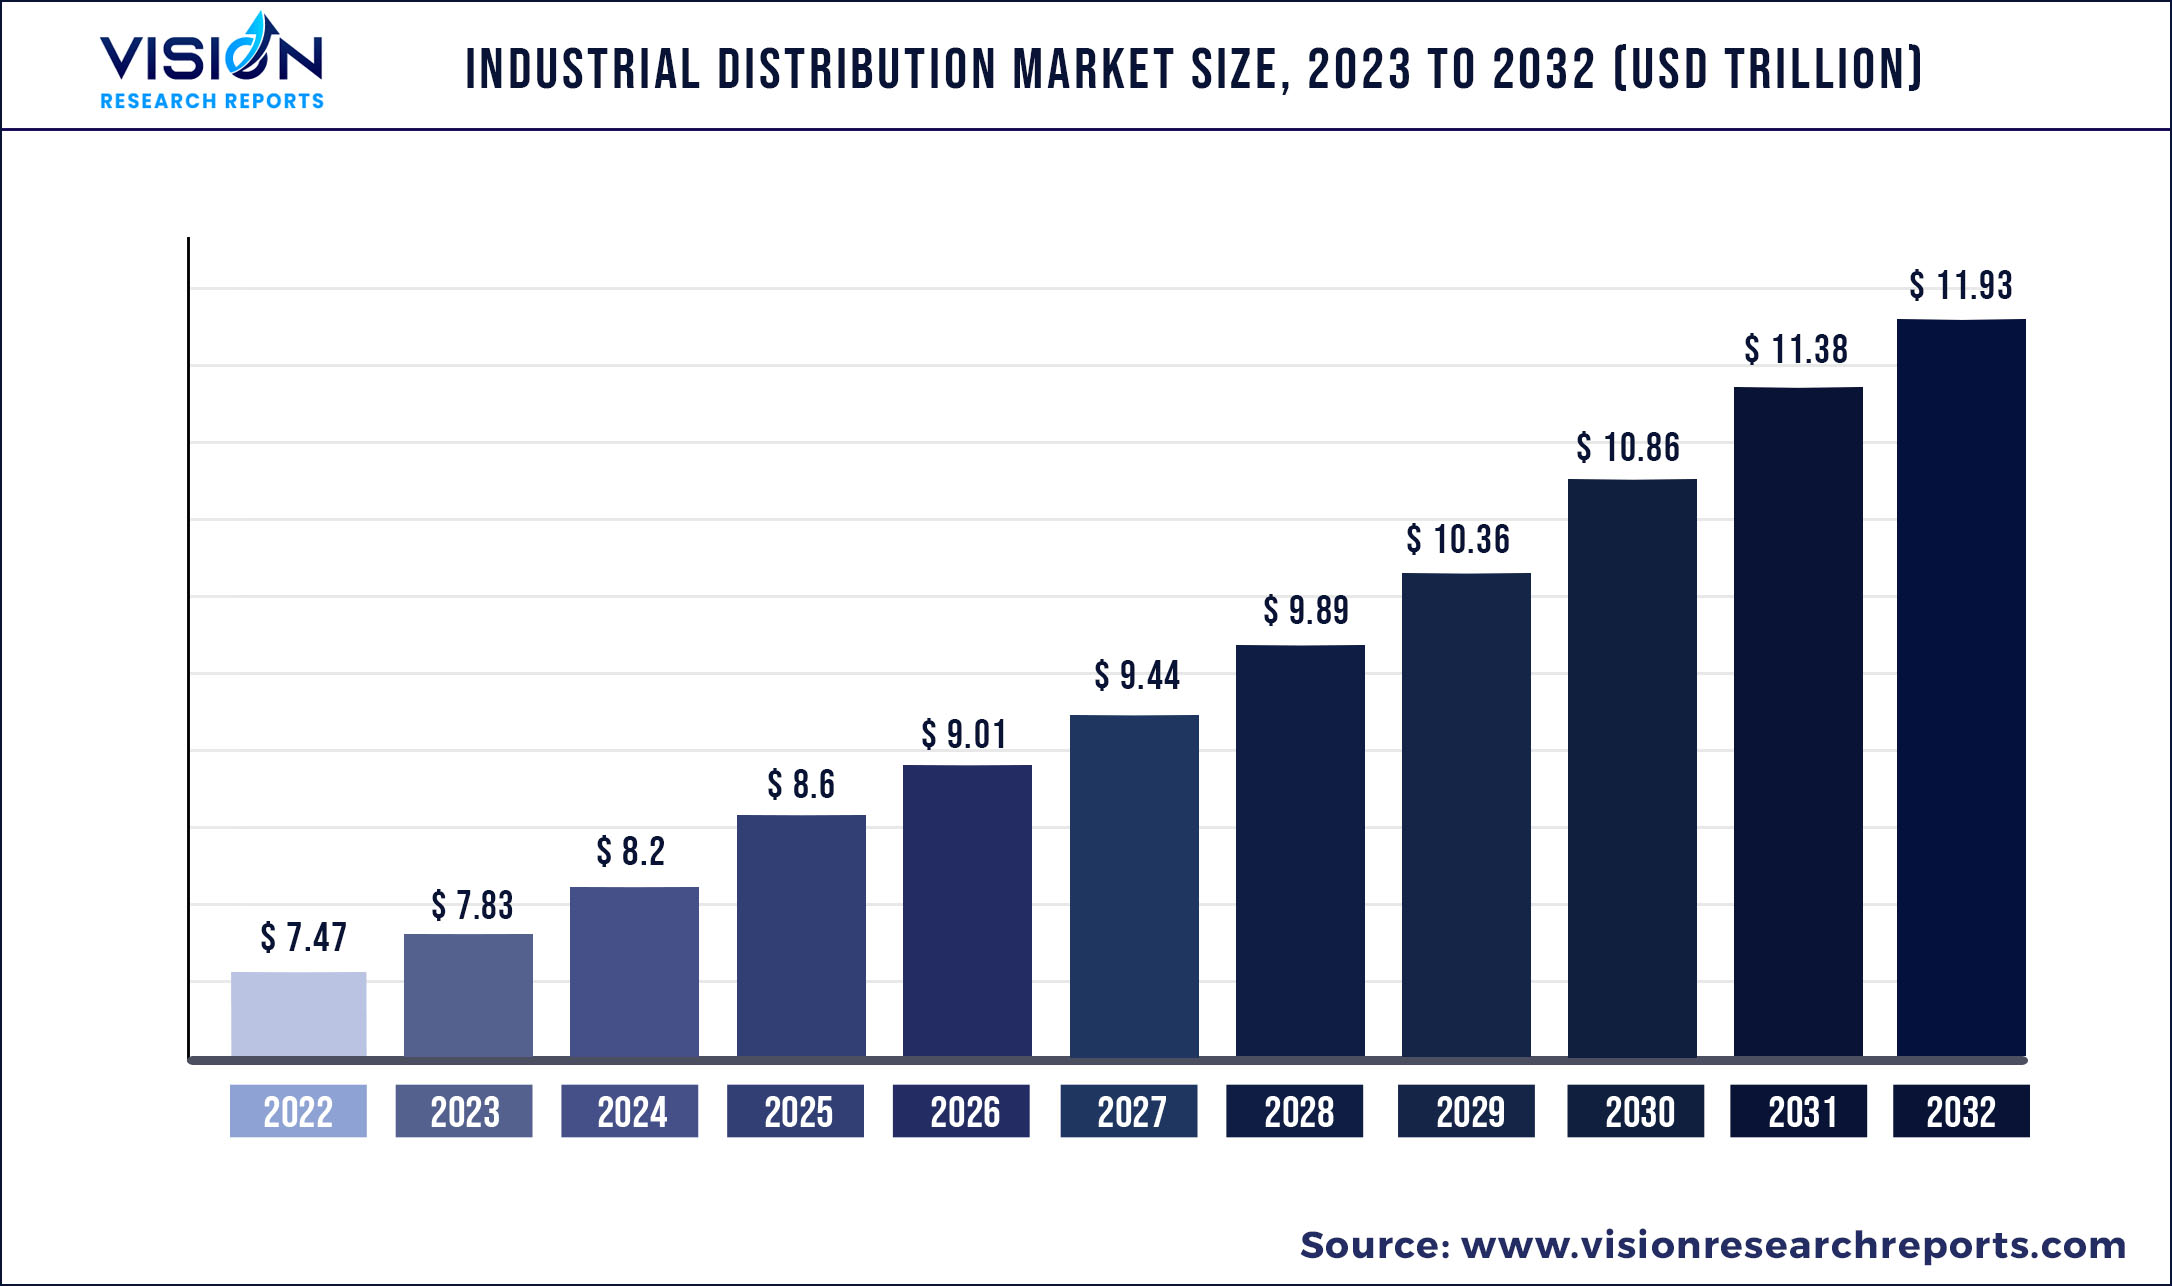 Industrial Distribution Market Size 2023 to 2032